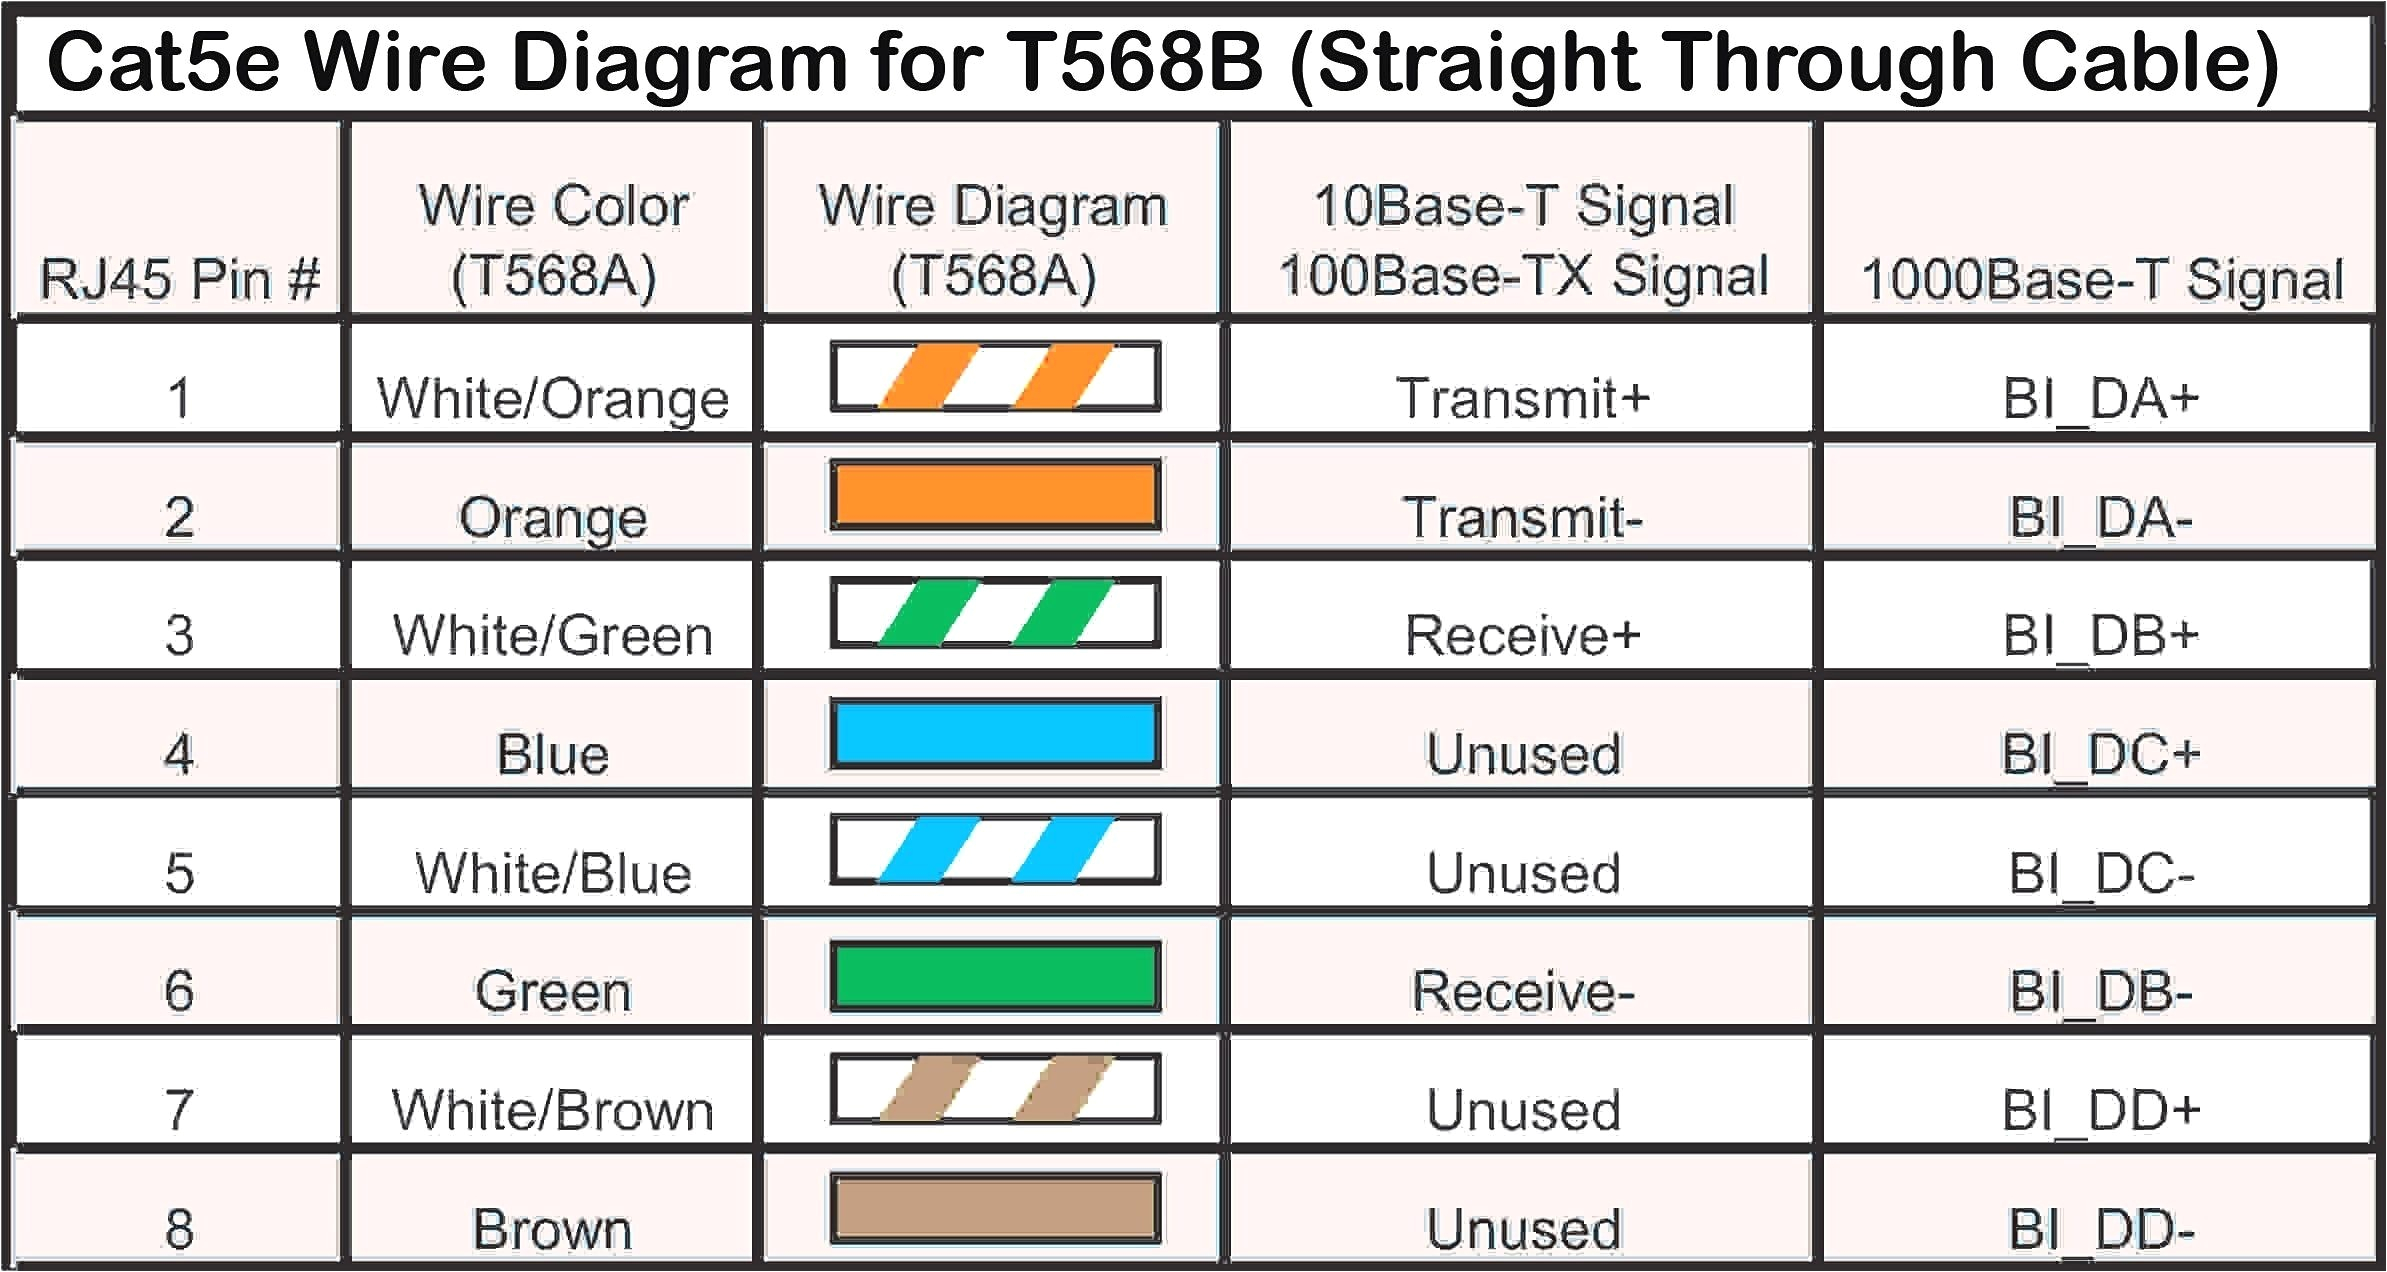 wiring diagram likewise cat 6 utp cable besides phone cable wiring cat 5 wiring diagram 568b cat 5 phone wire diagram